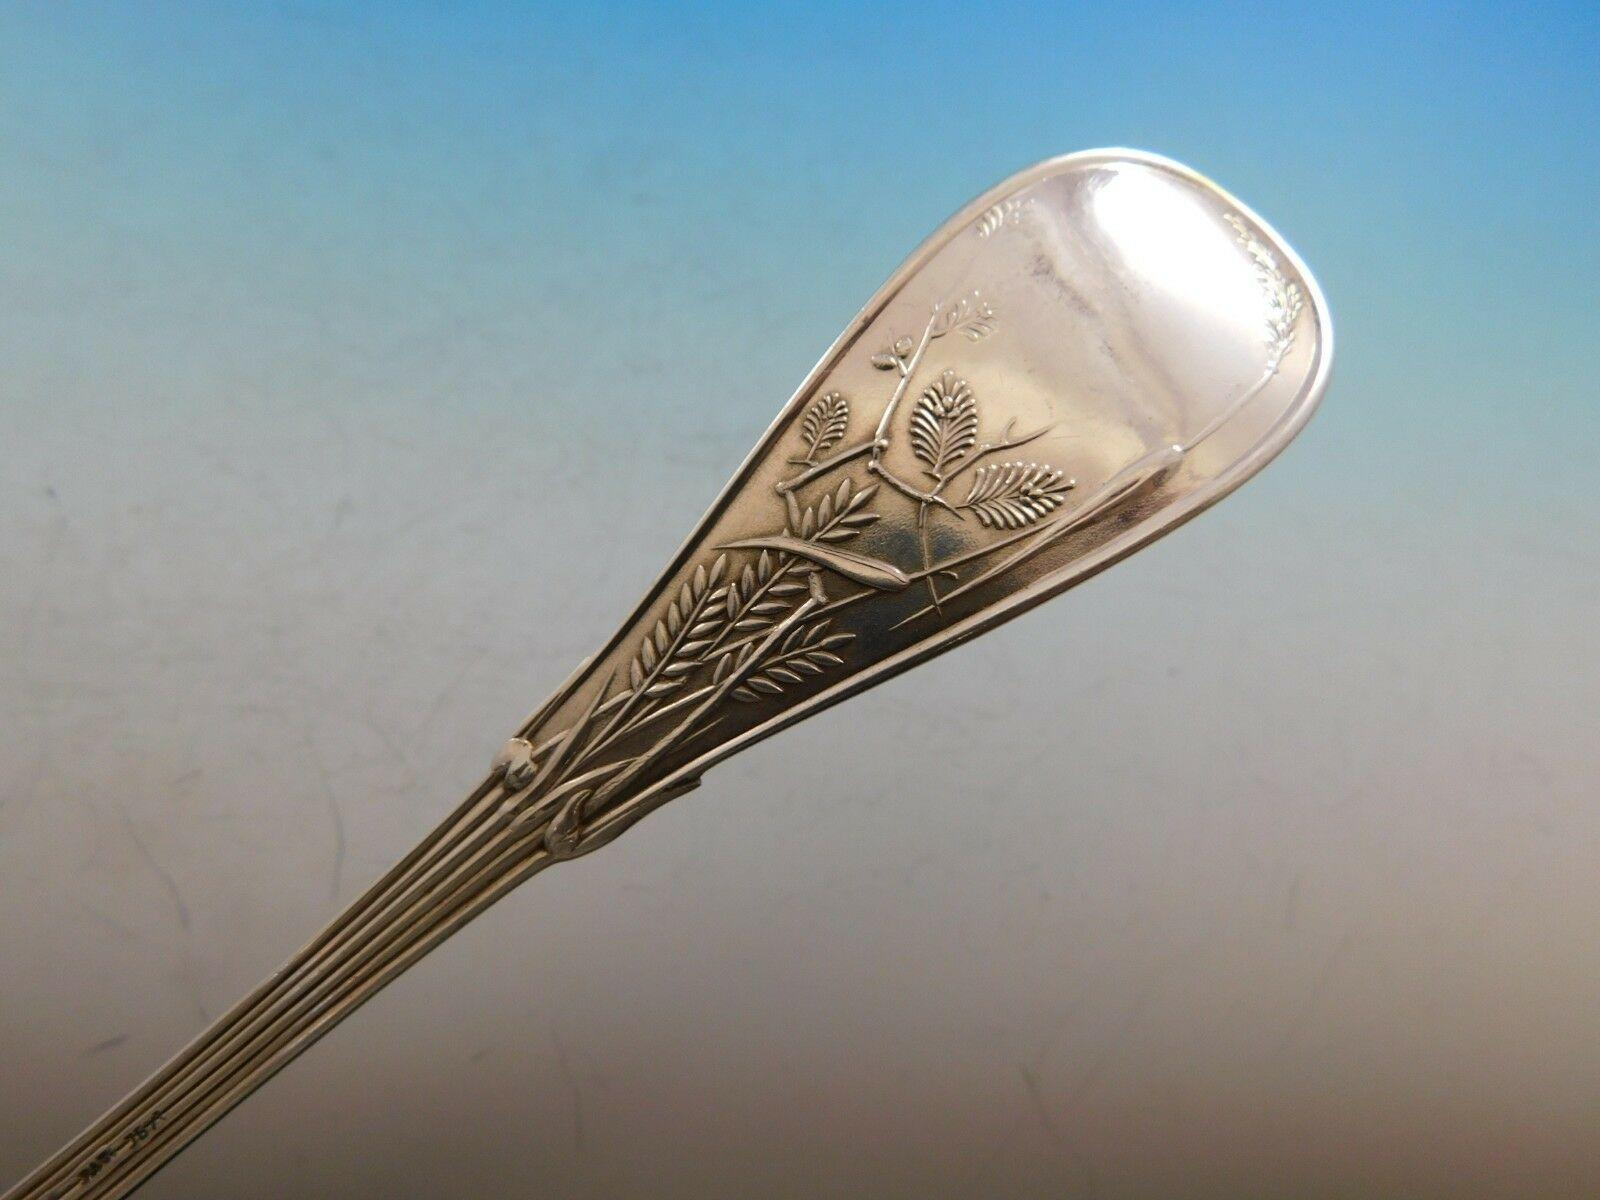 Japanese by Tiffany & Co. Sterling Silver Cracker Scoop Pie Crust Edge 1